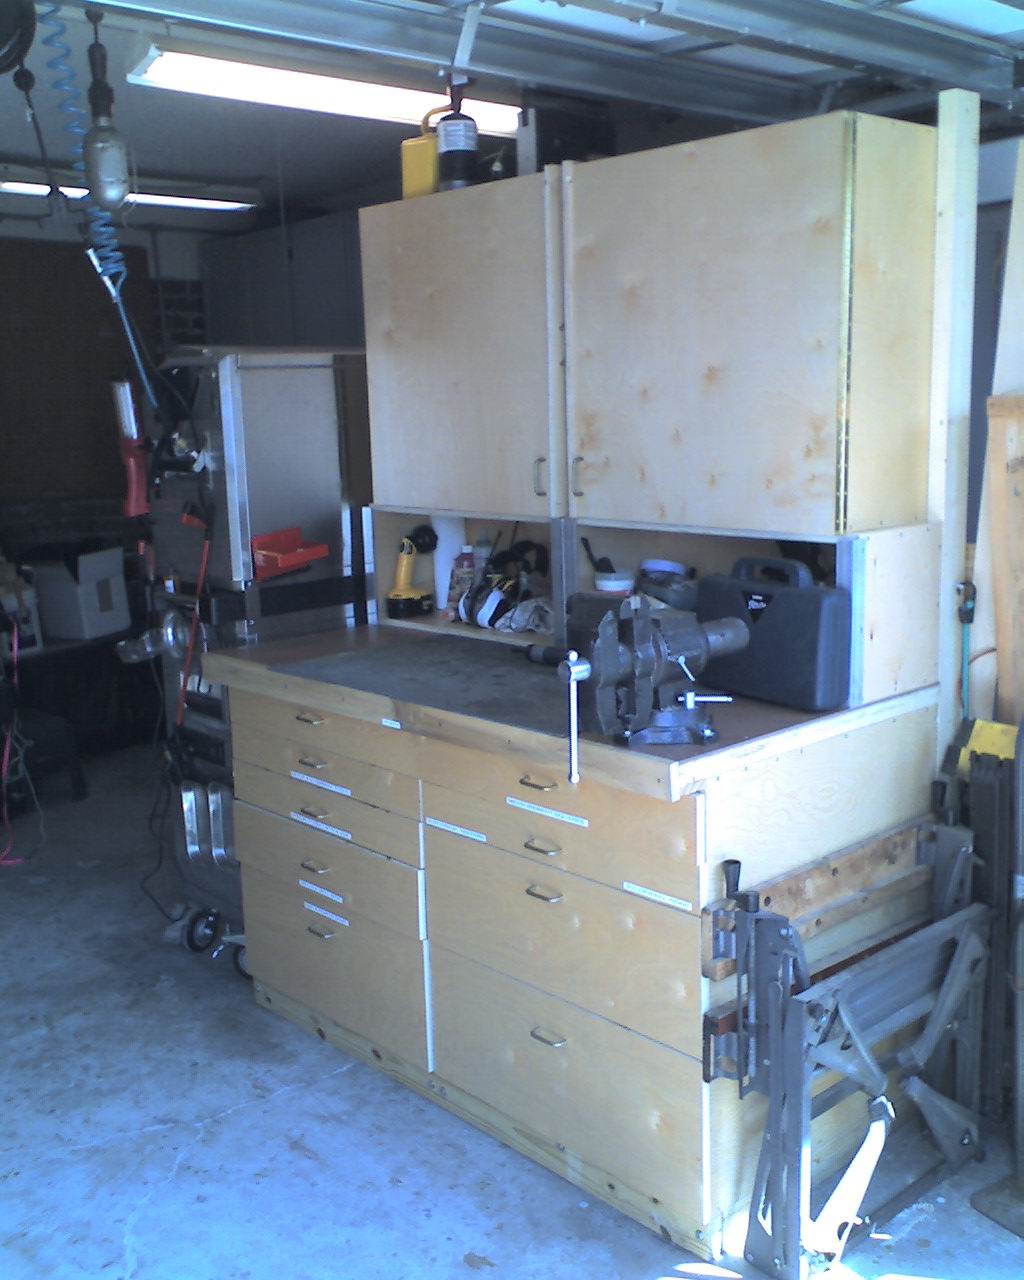 Workshop Benches and Cabinets